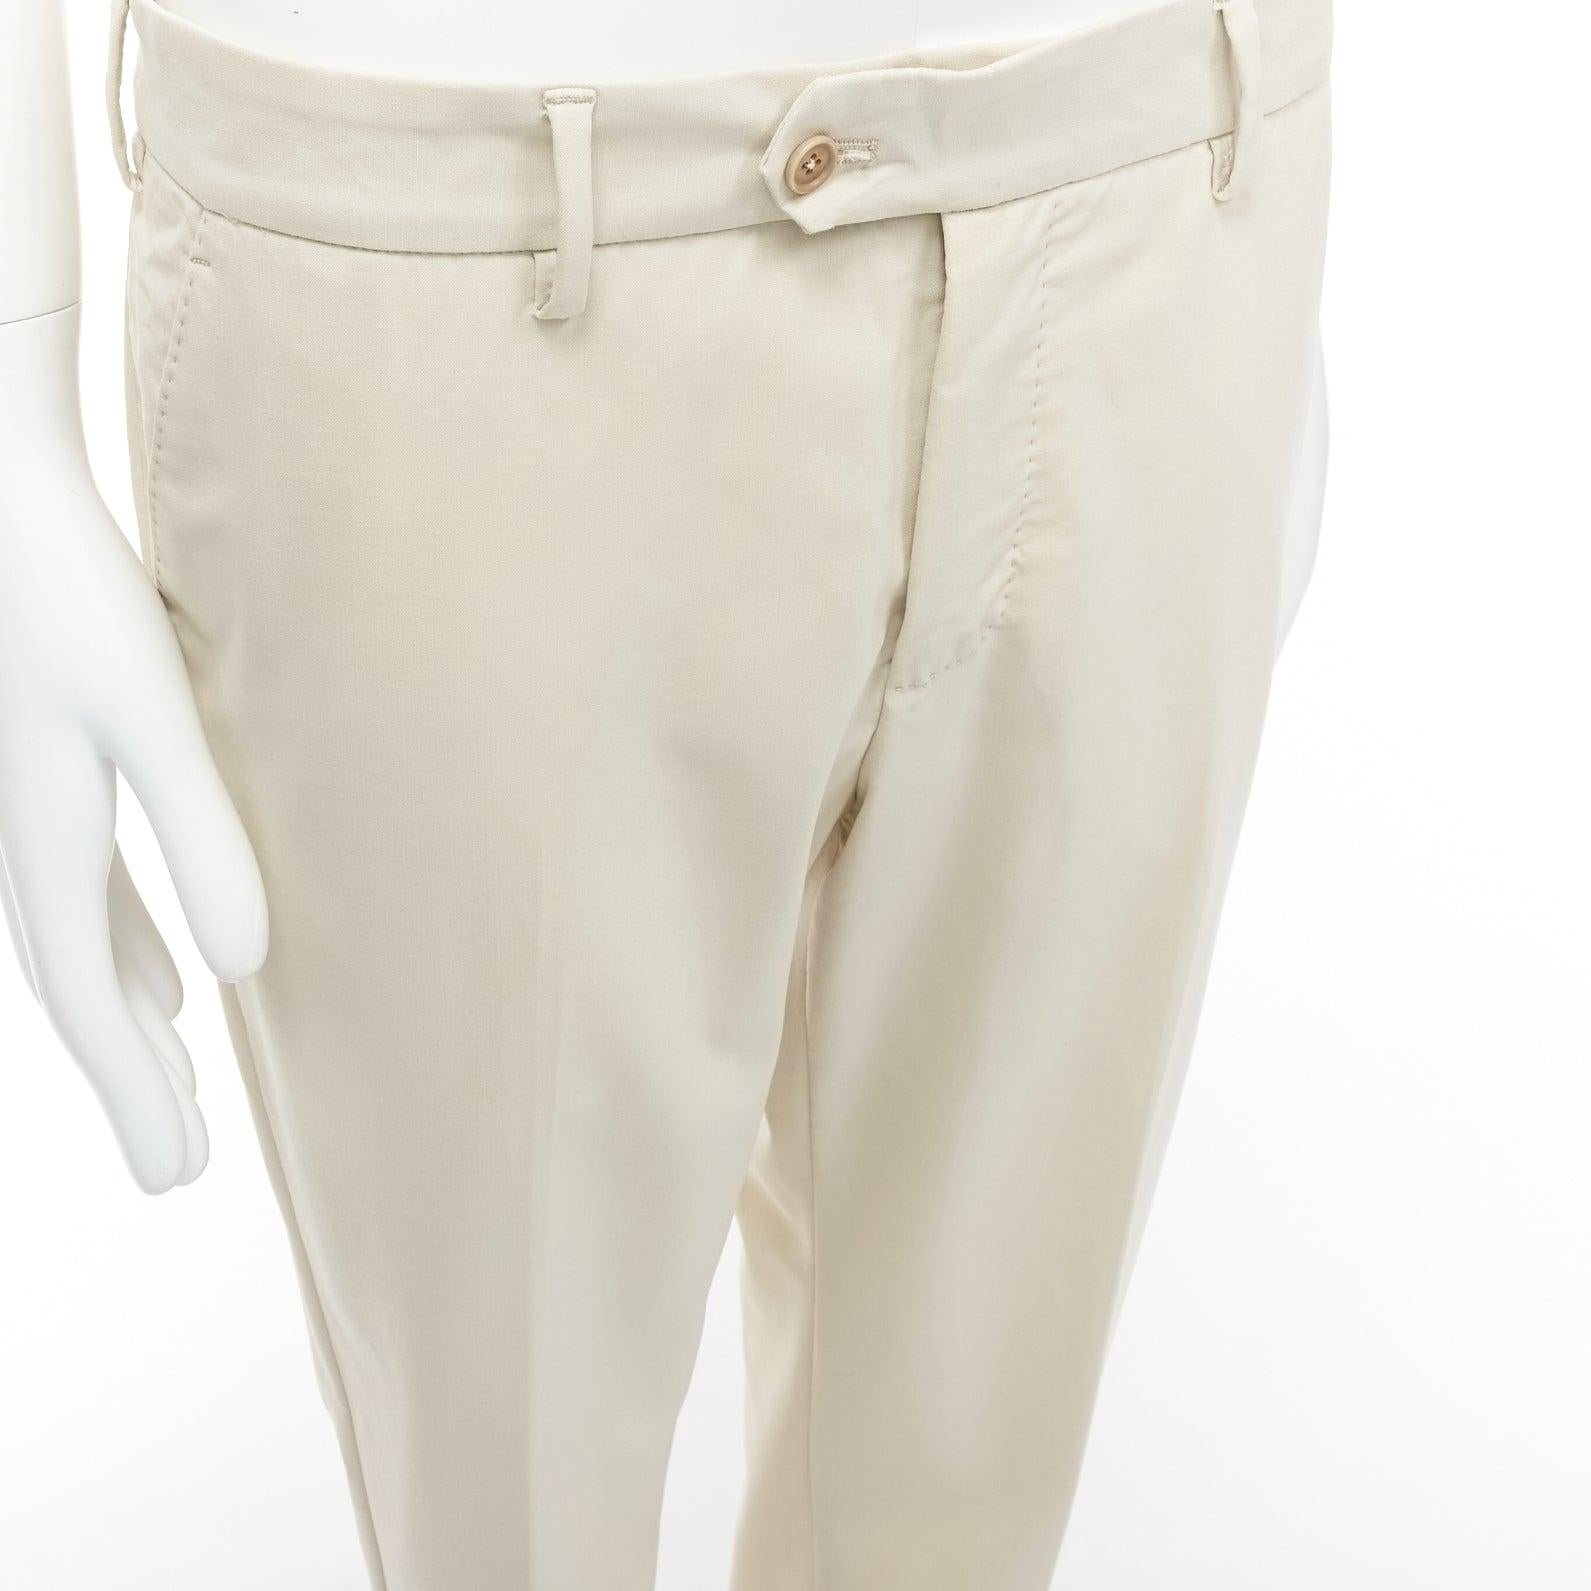 LA PERLA light beige virgin wool blend straight leg minimal classic pants M
Reference: CNLE/A00281
Brand: La Perla
Material: Virgin Wool, Blend
Color: Beige
Pattern: Solid
Closure: Zip Fly
Extra Details: 2 pockets at back.
Made in: